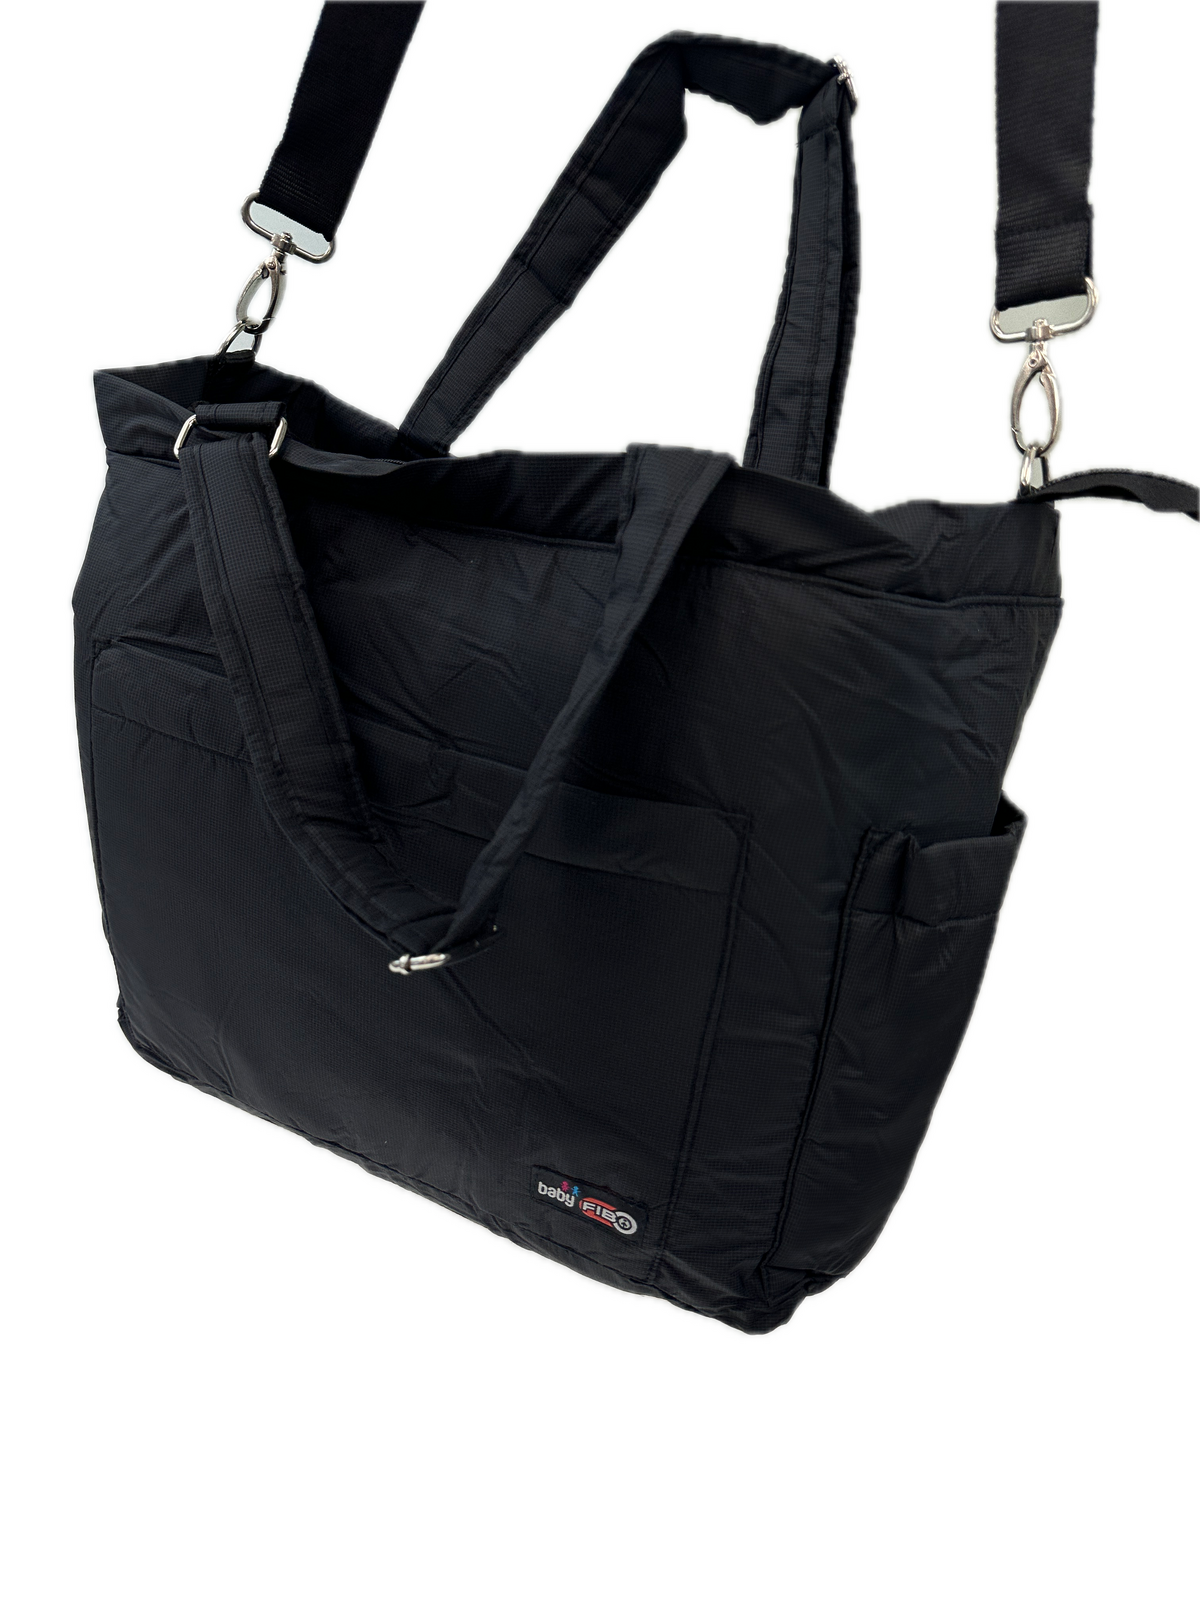 Baby Nappy Bag Diaper Maternity Milk Mummy Changing Travel Tote - Black